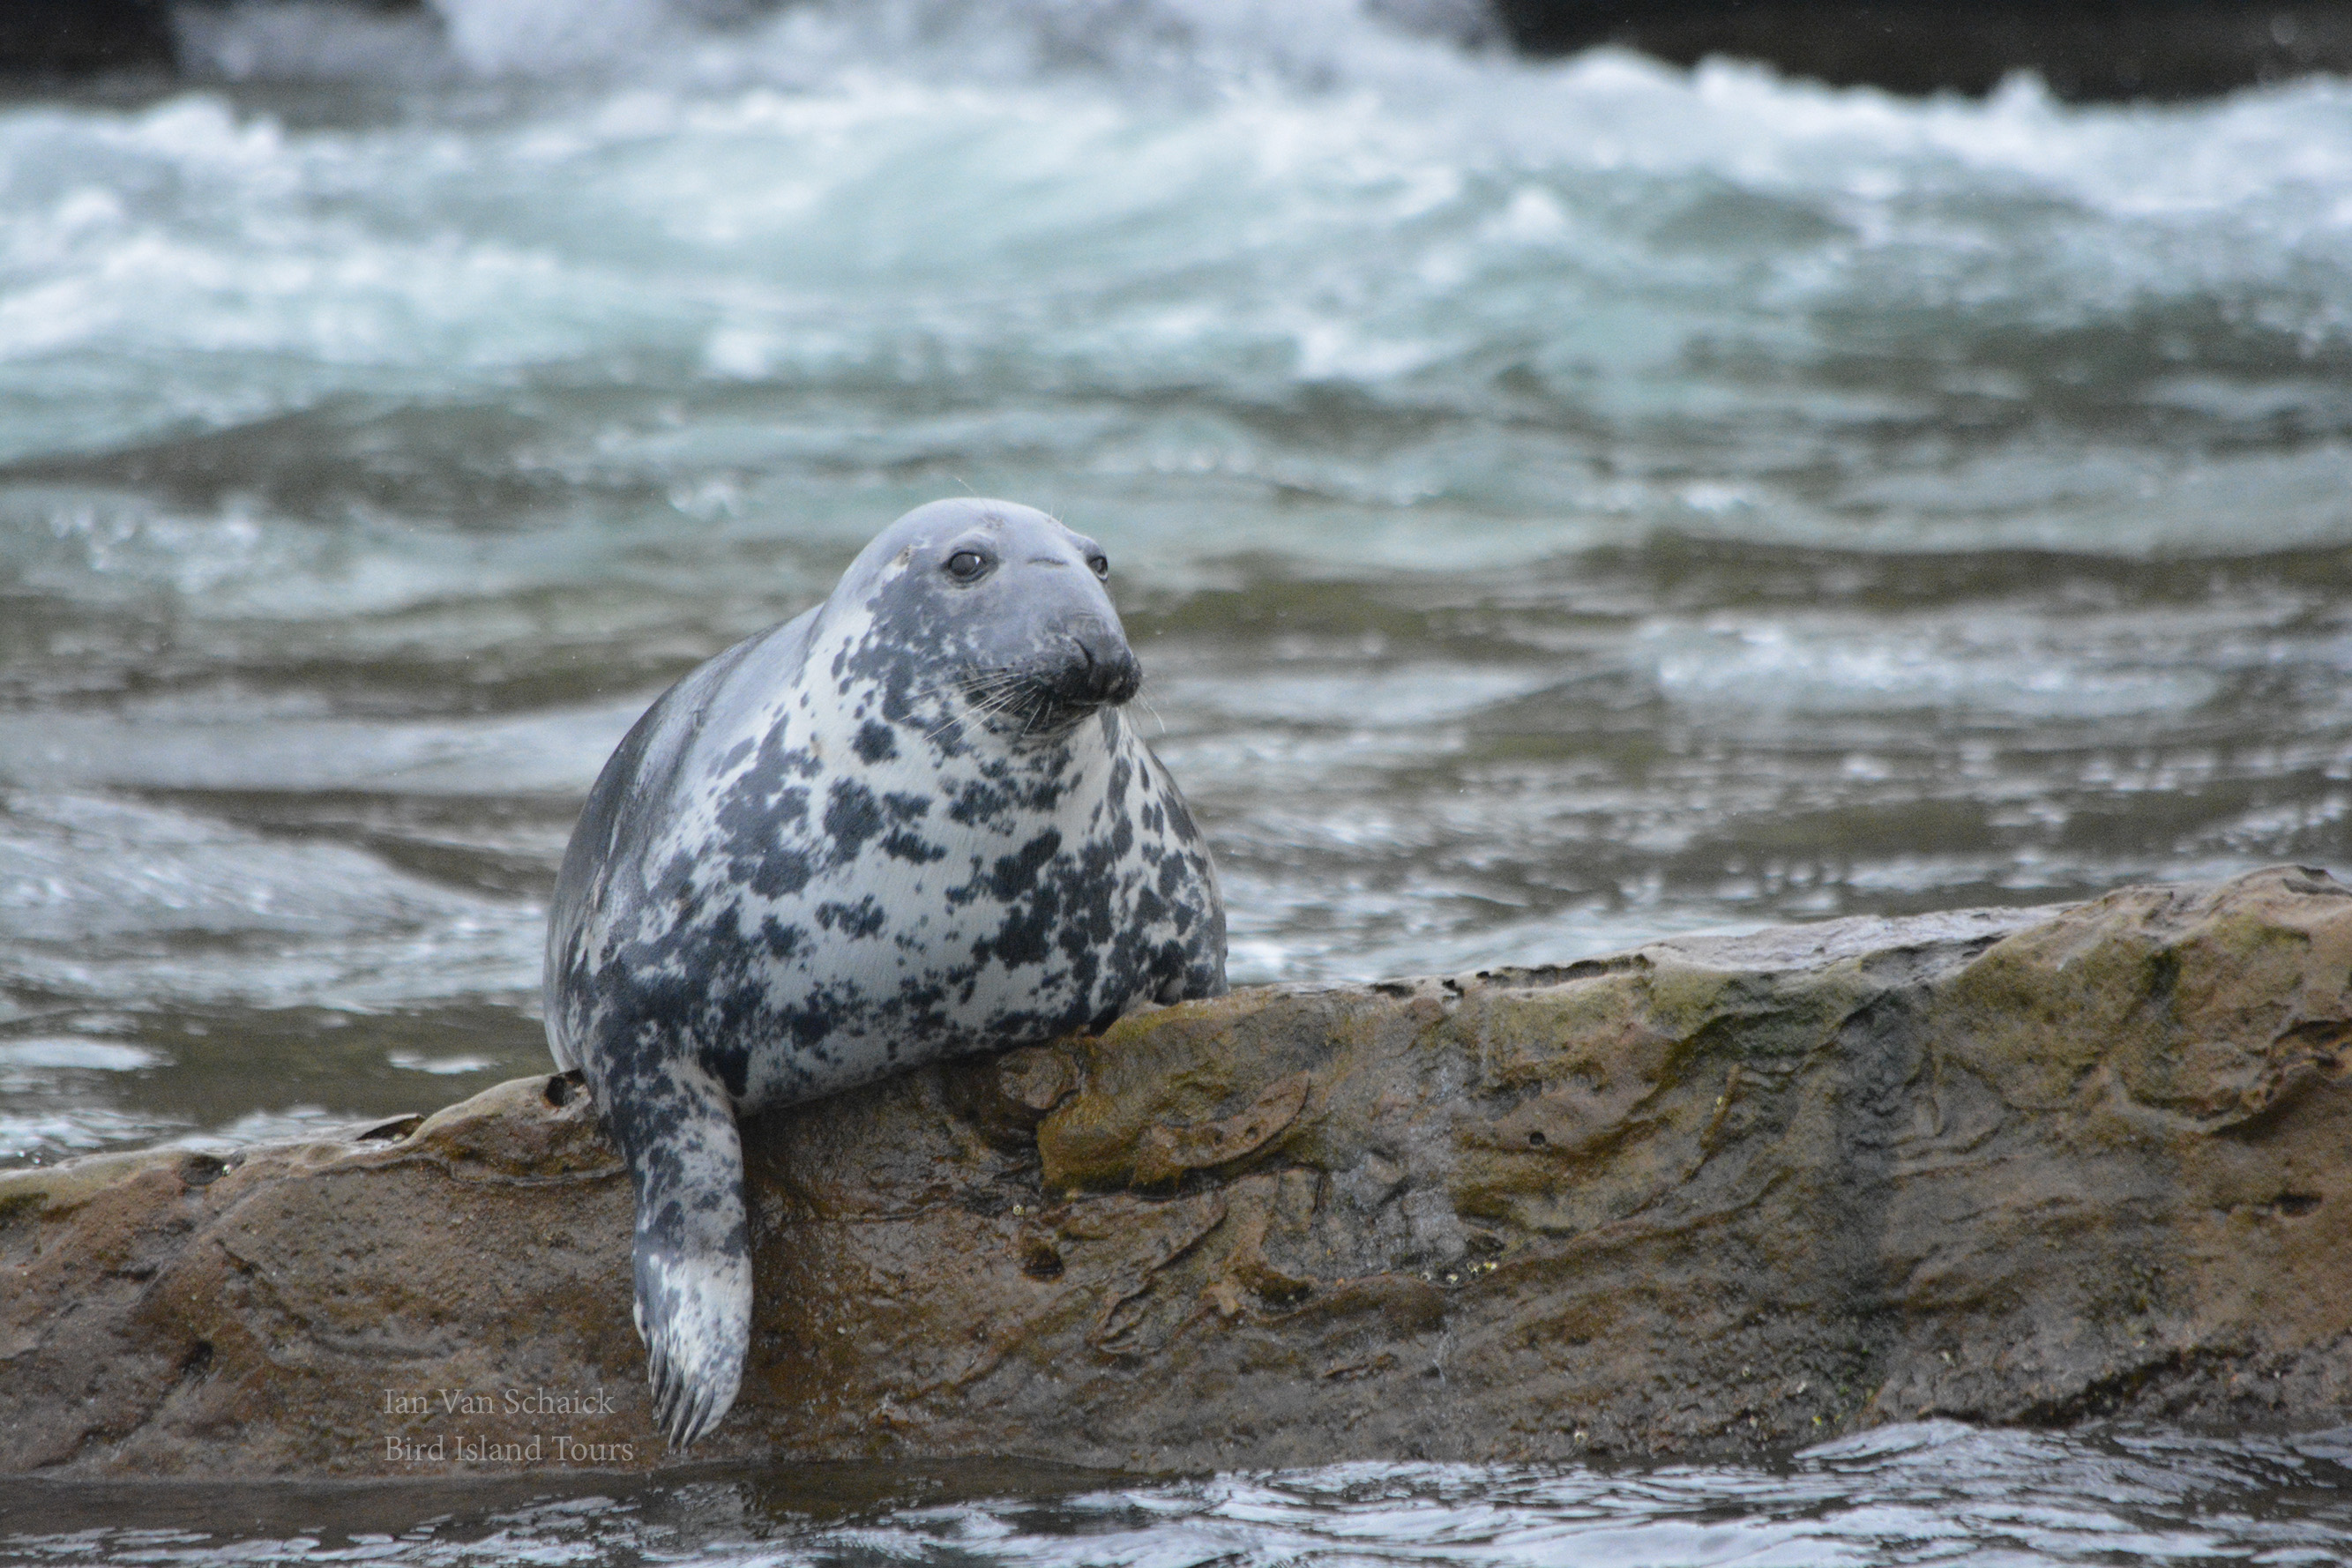 A curious seal on a rock